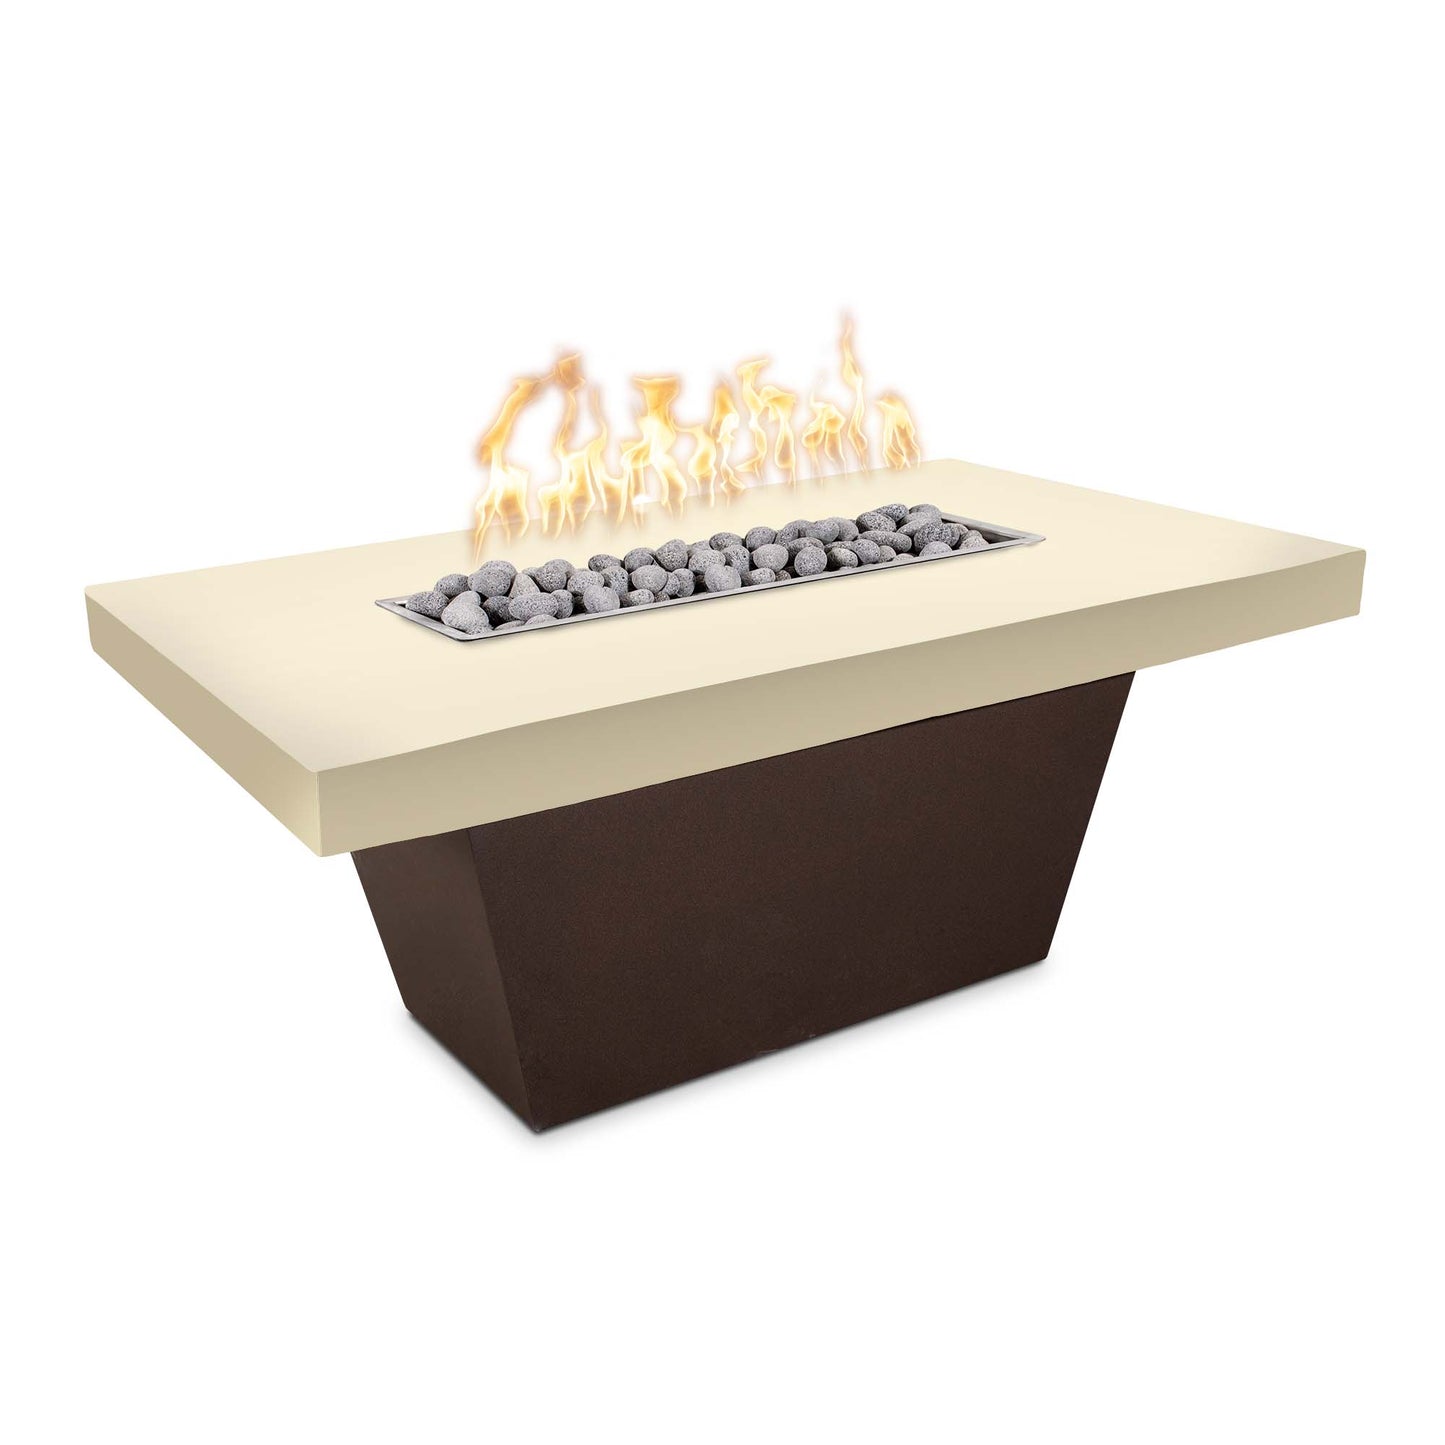 The Outdoor Plus Tacoma 48" Rustic White Concrete Top & Java Powder Coated Base Natural Gas Fire Table with Match Lit Ignition